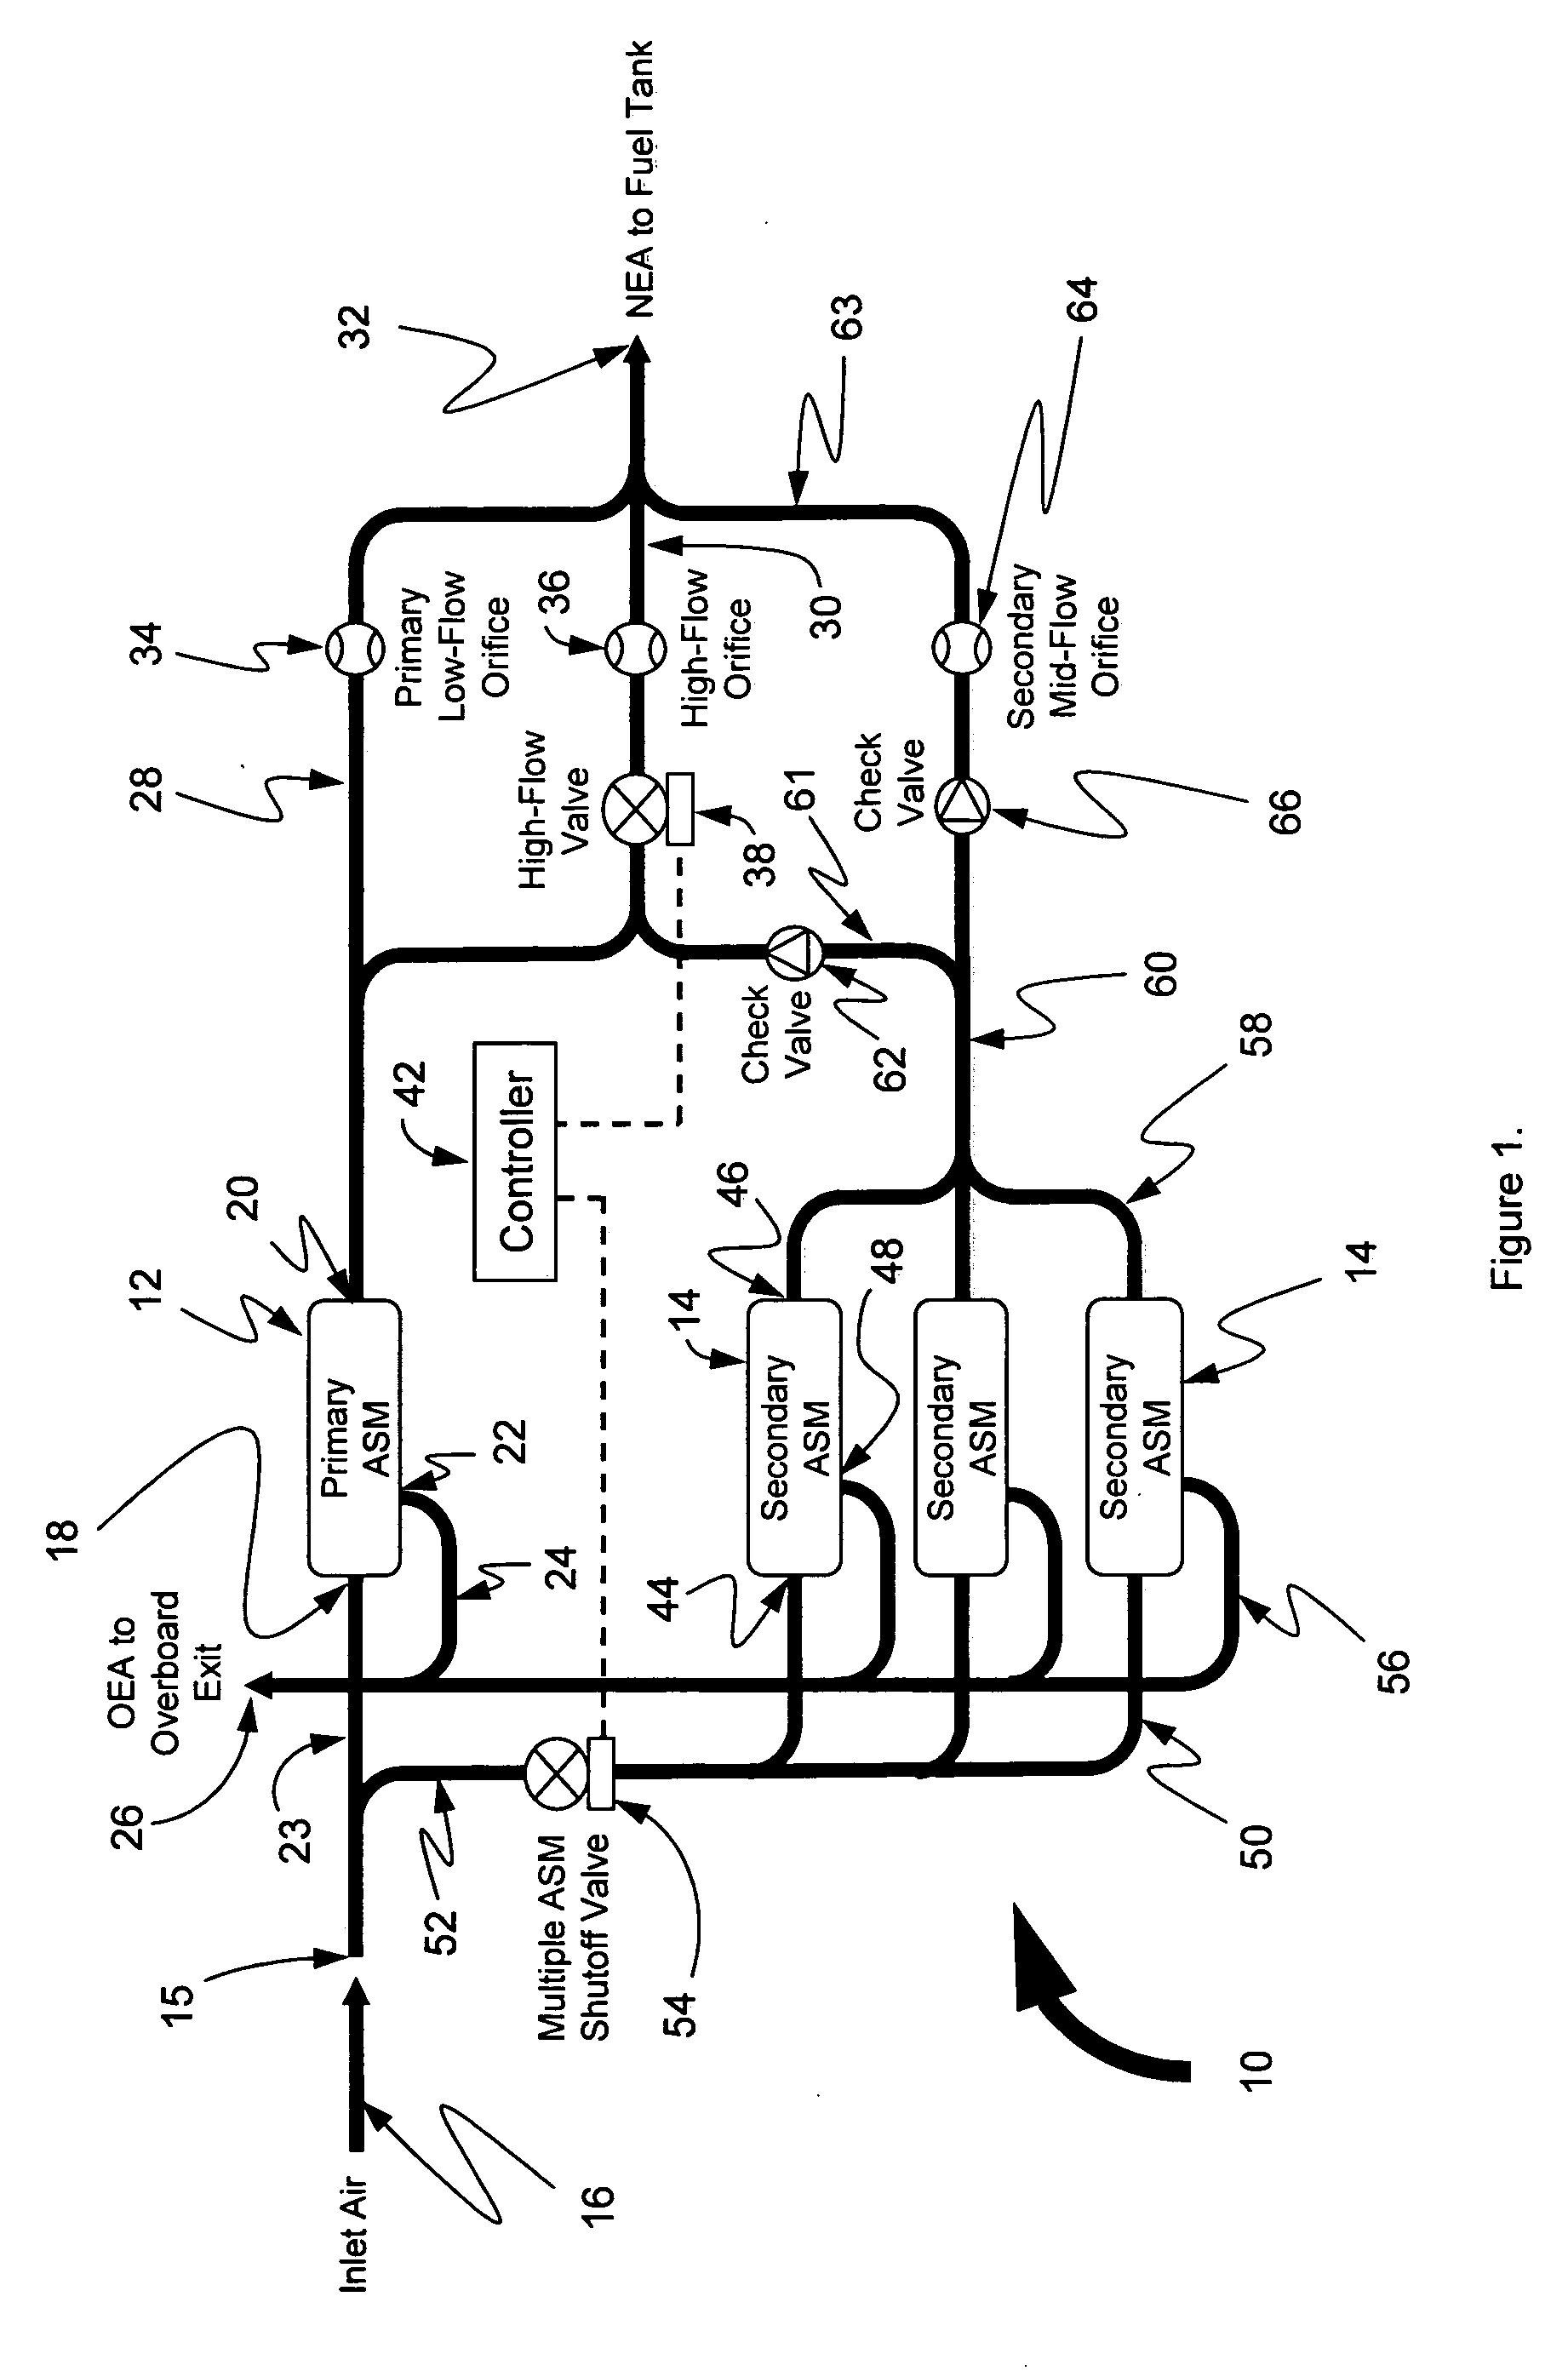 Three flow architecture and method for aircraft OBIGGS